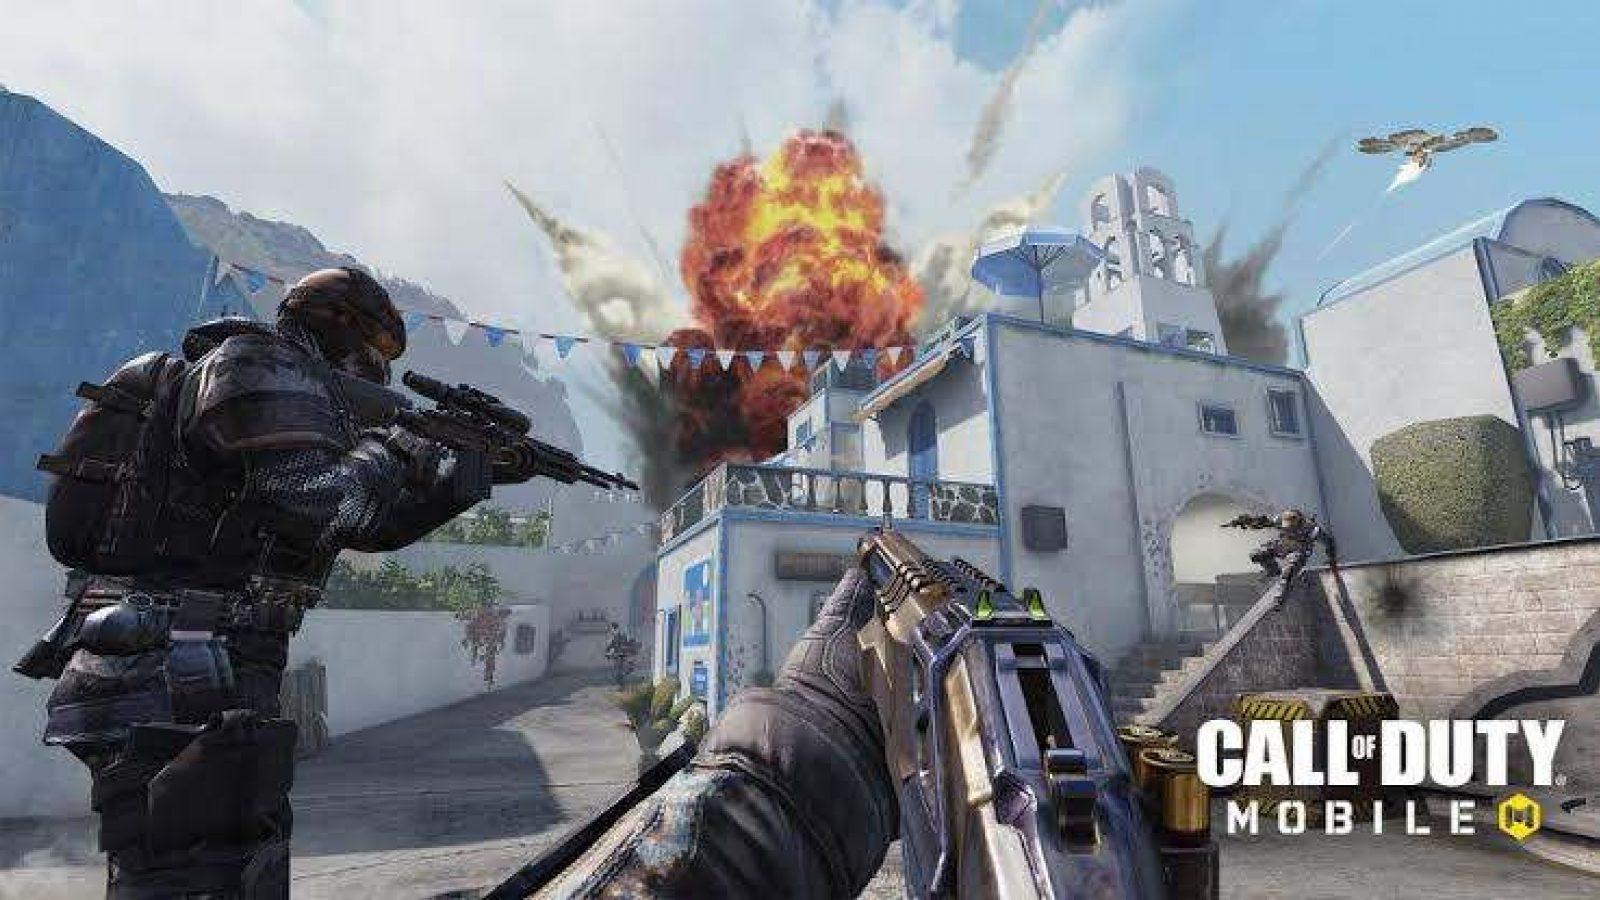 How to Play Call of Duty Mobile on PC?